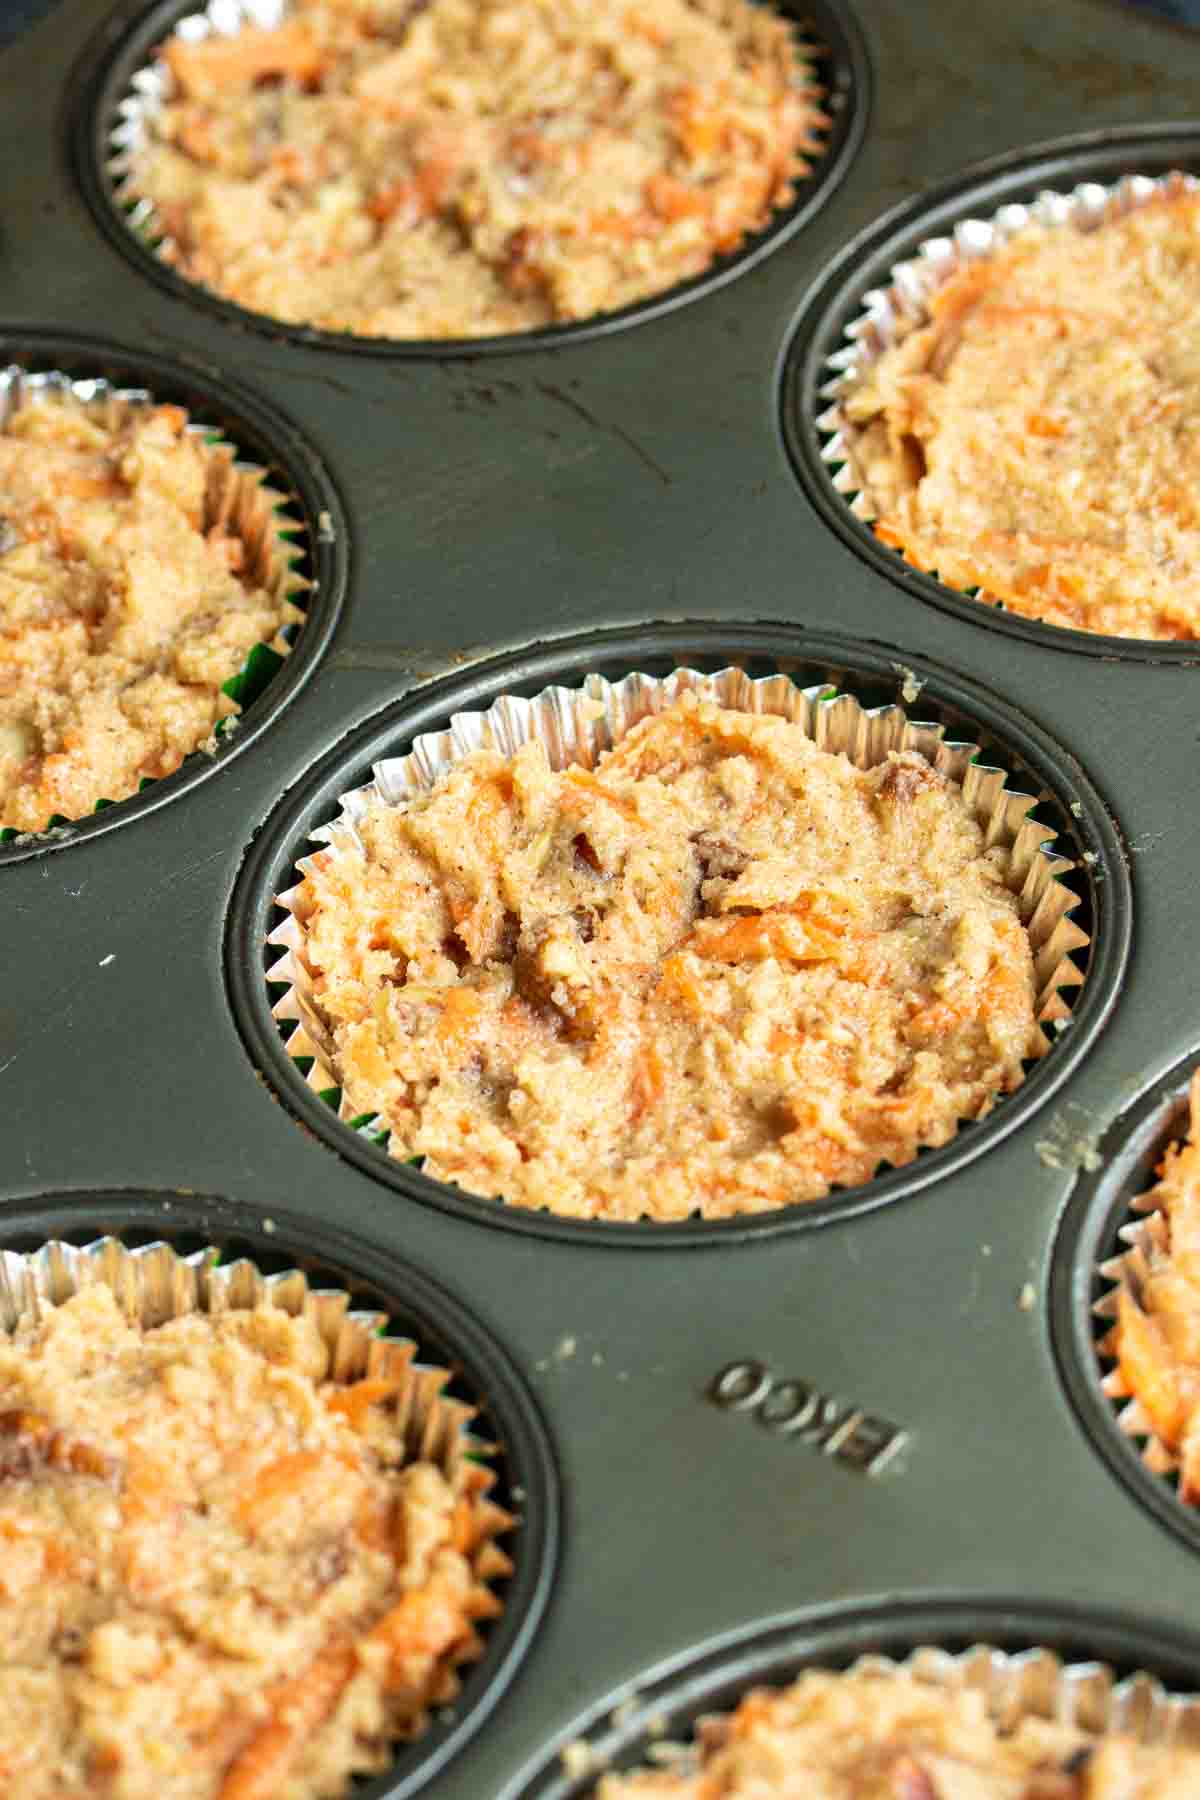 Freshly baked Keto Carrot Cake.in a muffin tin.